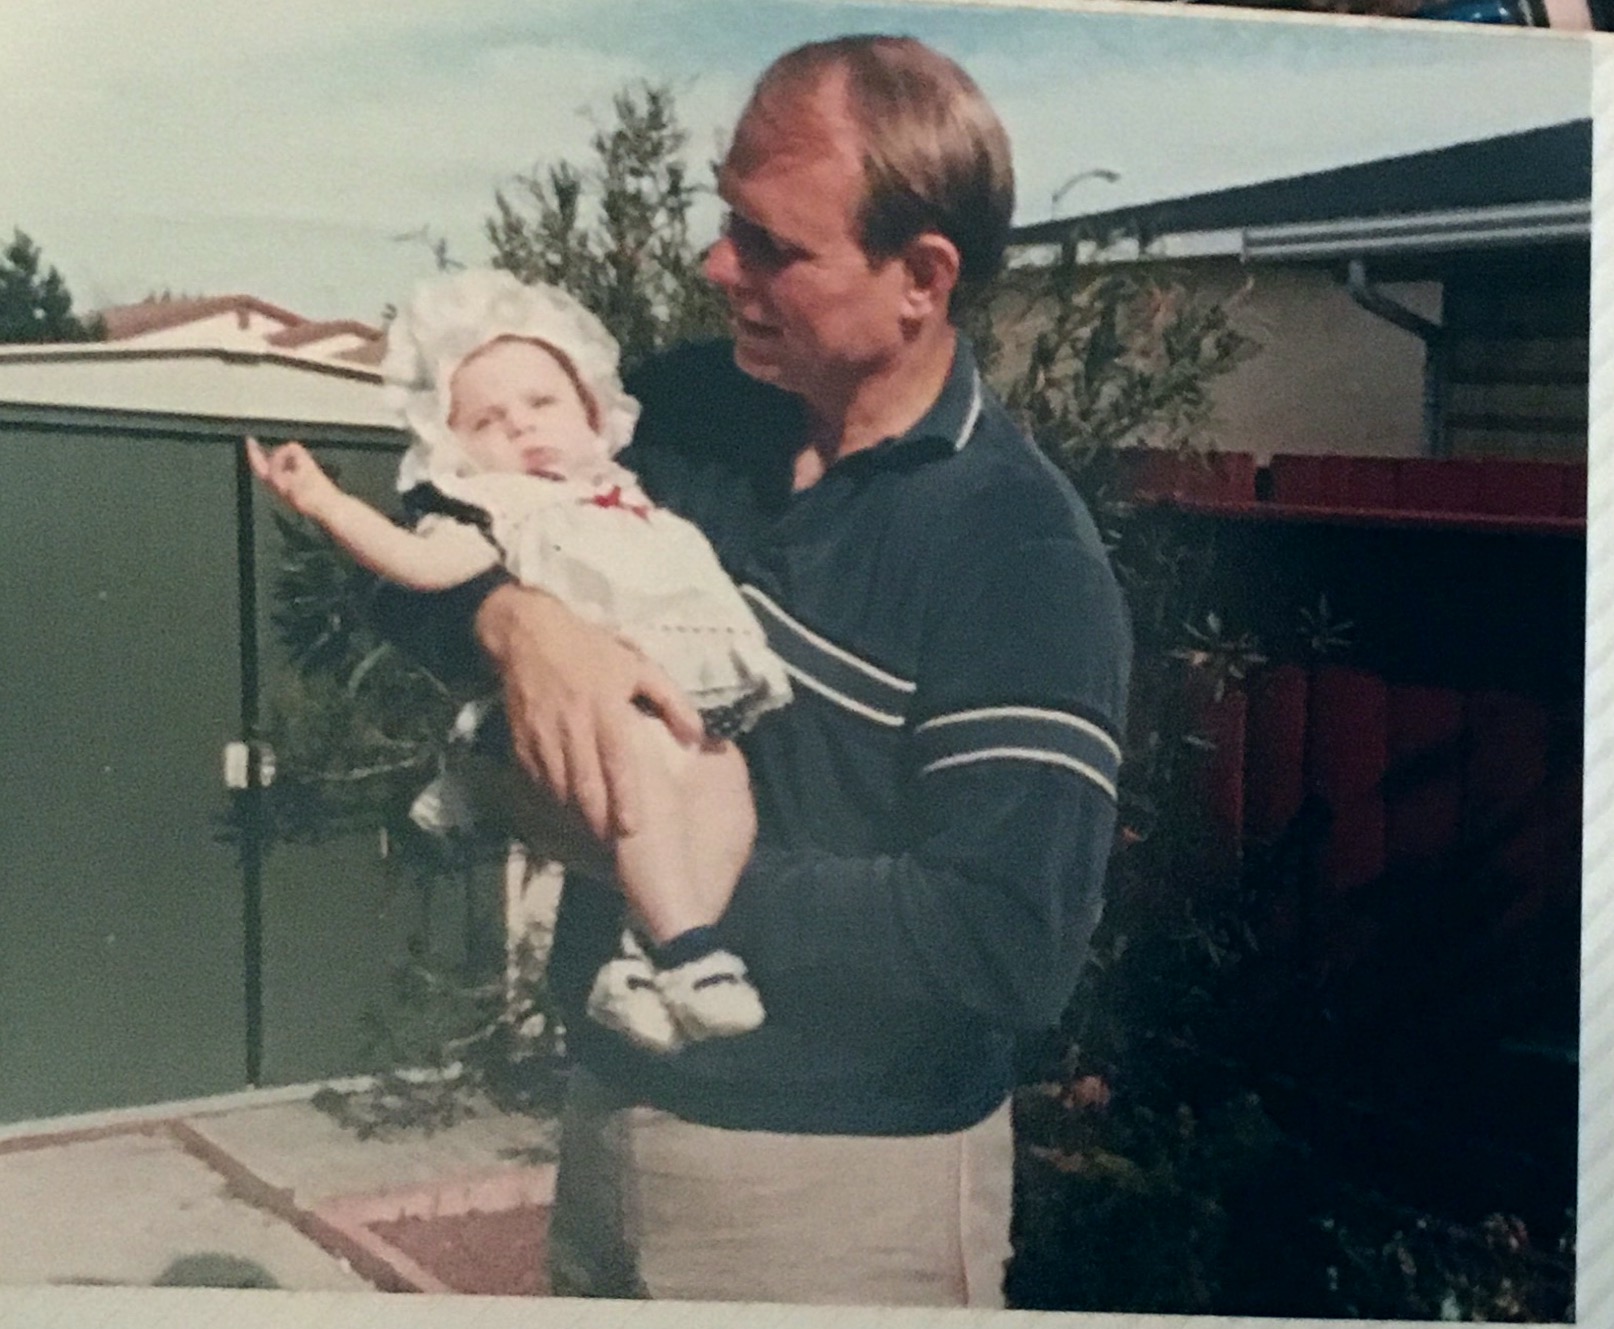 My daddy and me circa 1984